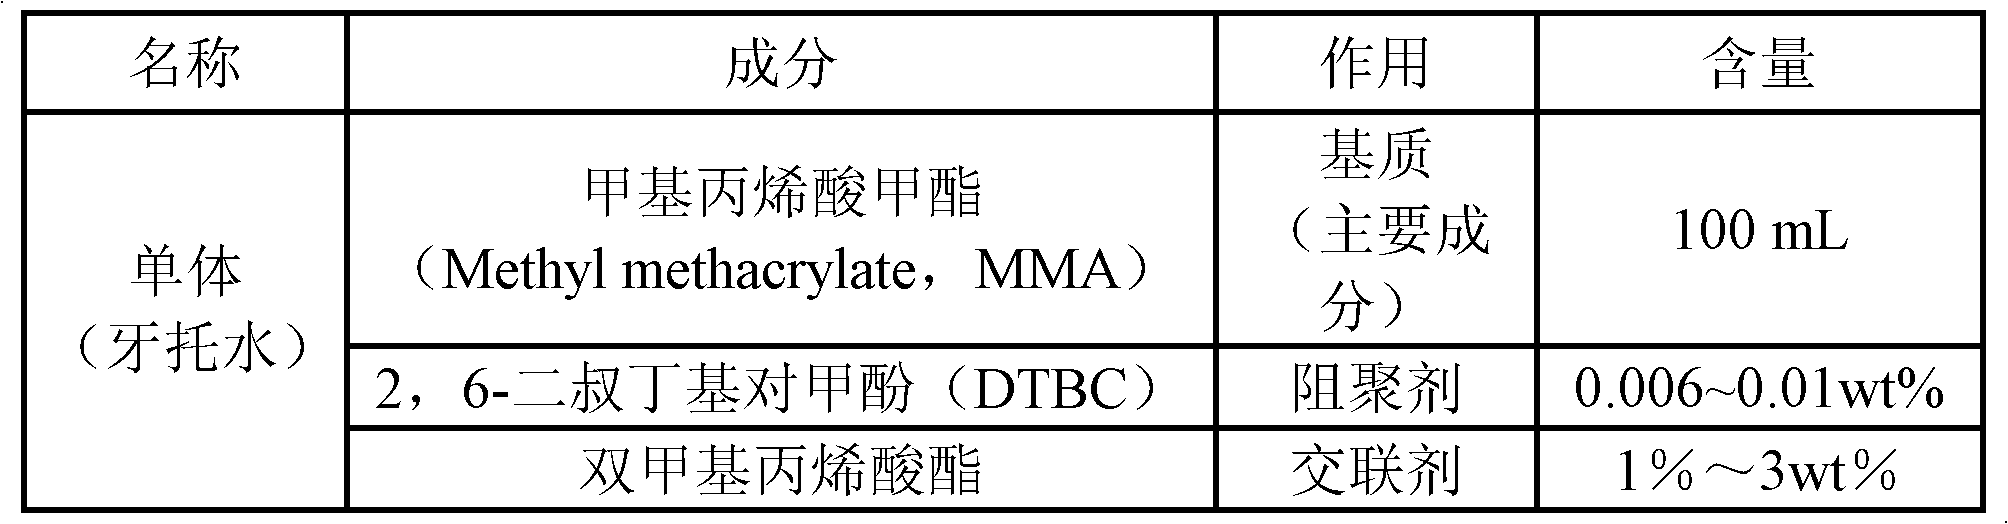 Methyl acrylate (MA)-methyl methacrylate (MMA) copolymer-base denture base material as well as preparation method and application thereof